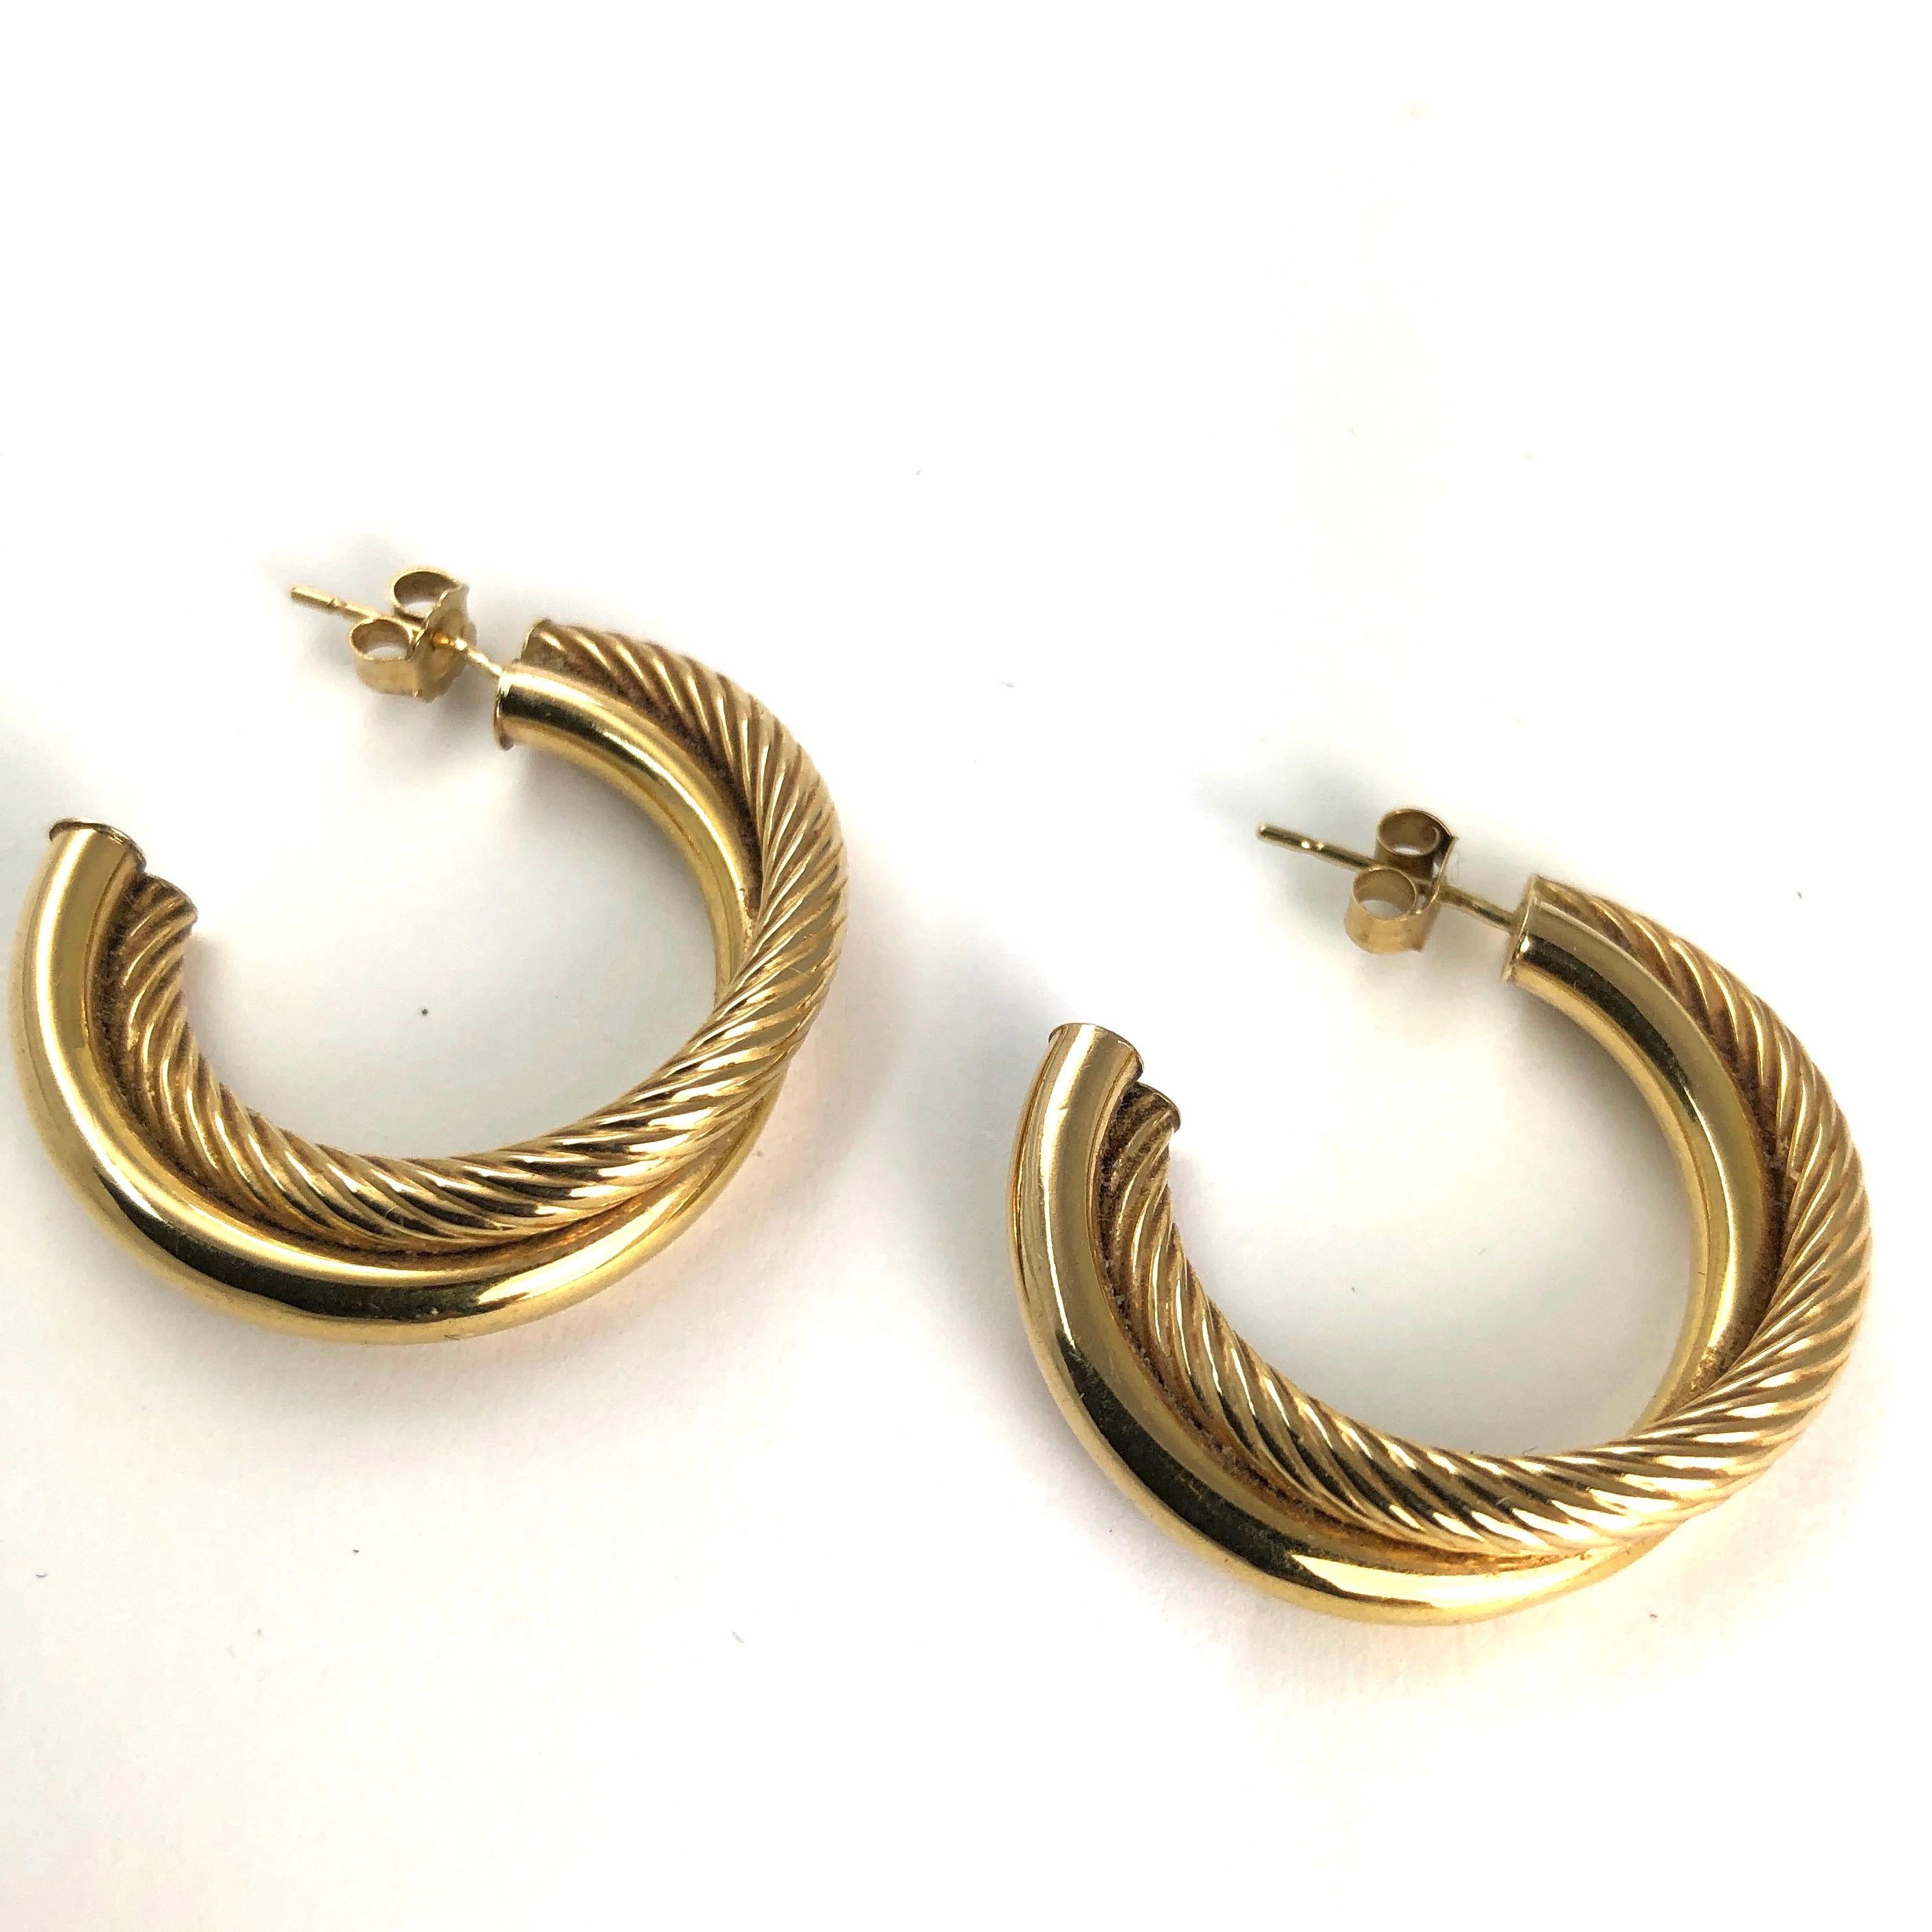 There are two textured hoops that intertwine to make up these gorgeous hoop earrings. One of the hoops is gorgeously smooth and glossy and the other is grooved from end to end.

Hoop Diameter: 1 1/8 inches

Weight: 2.8g